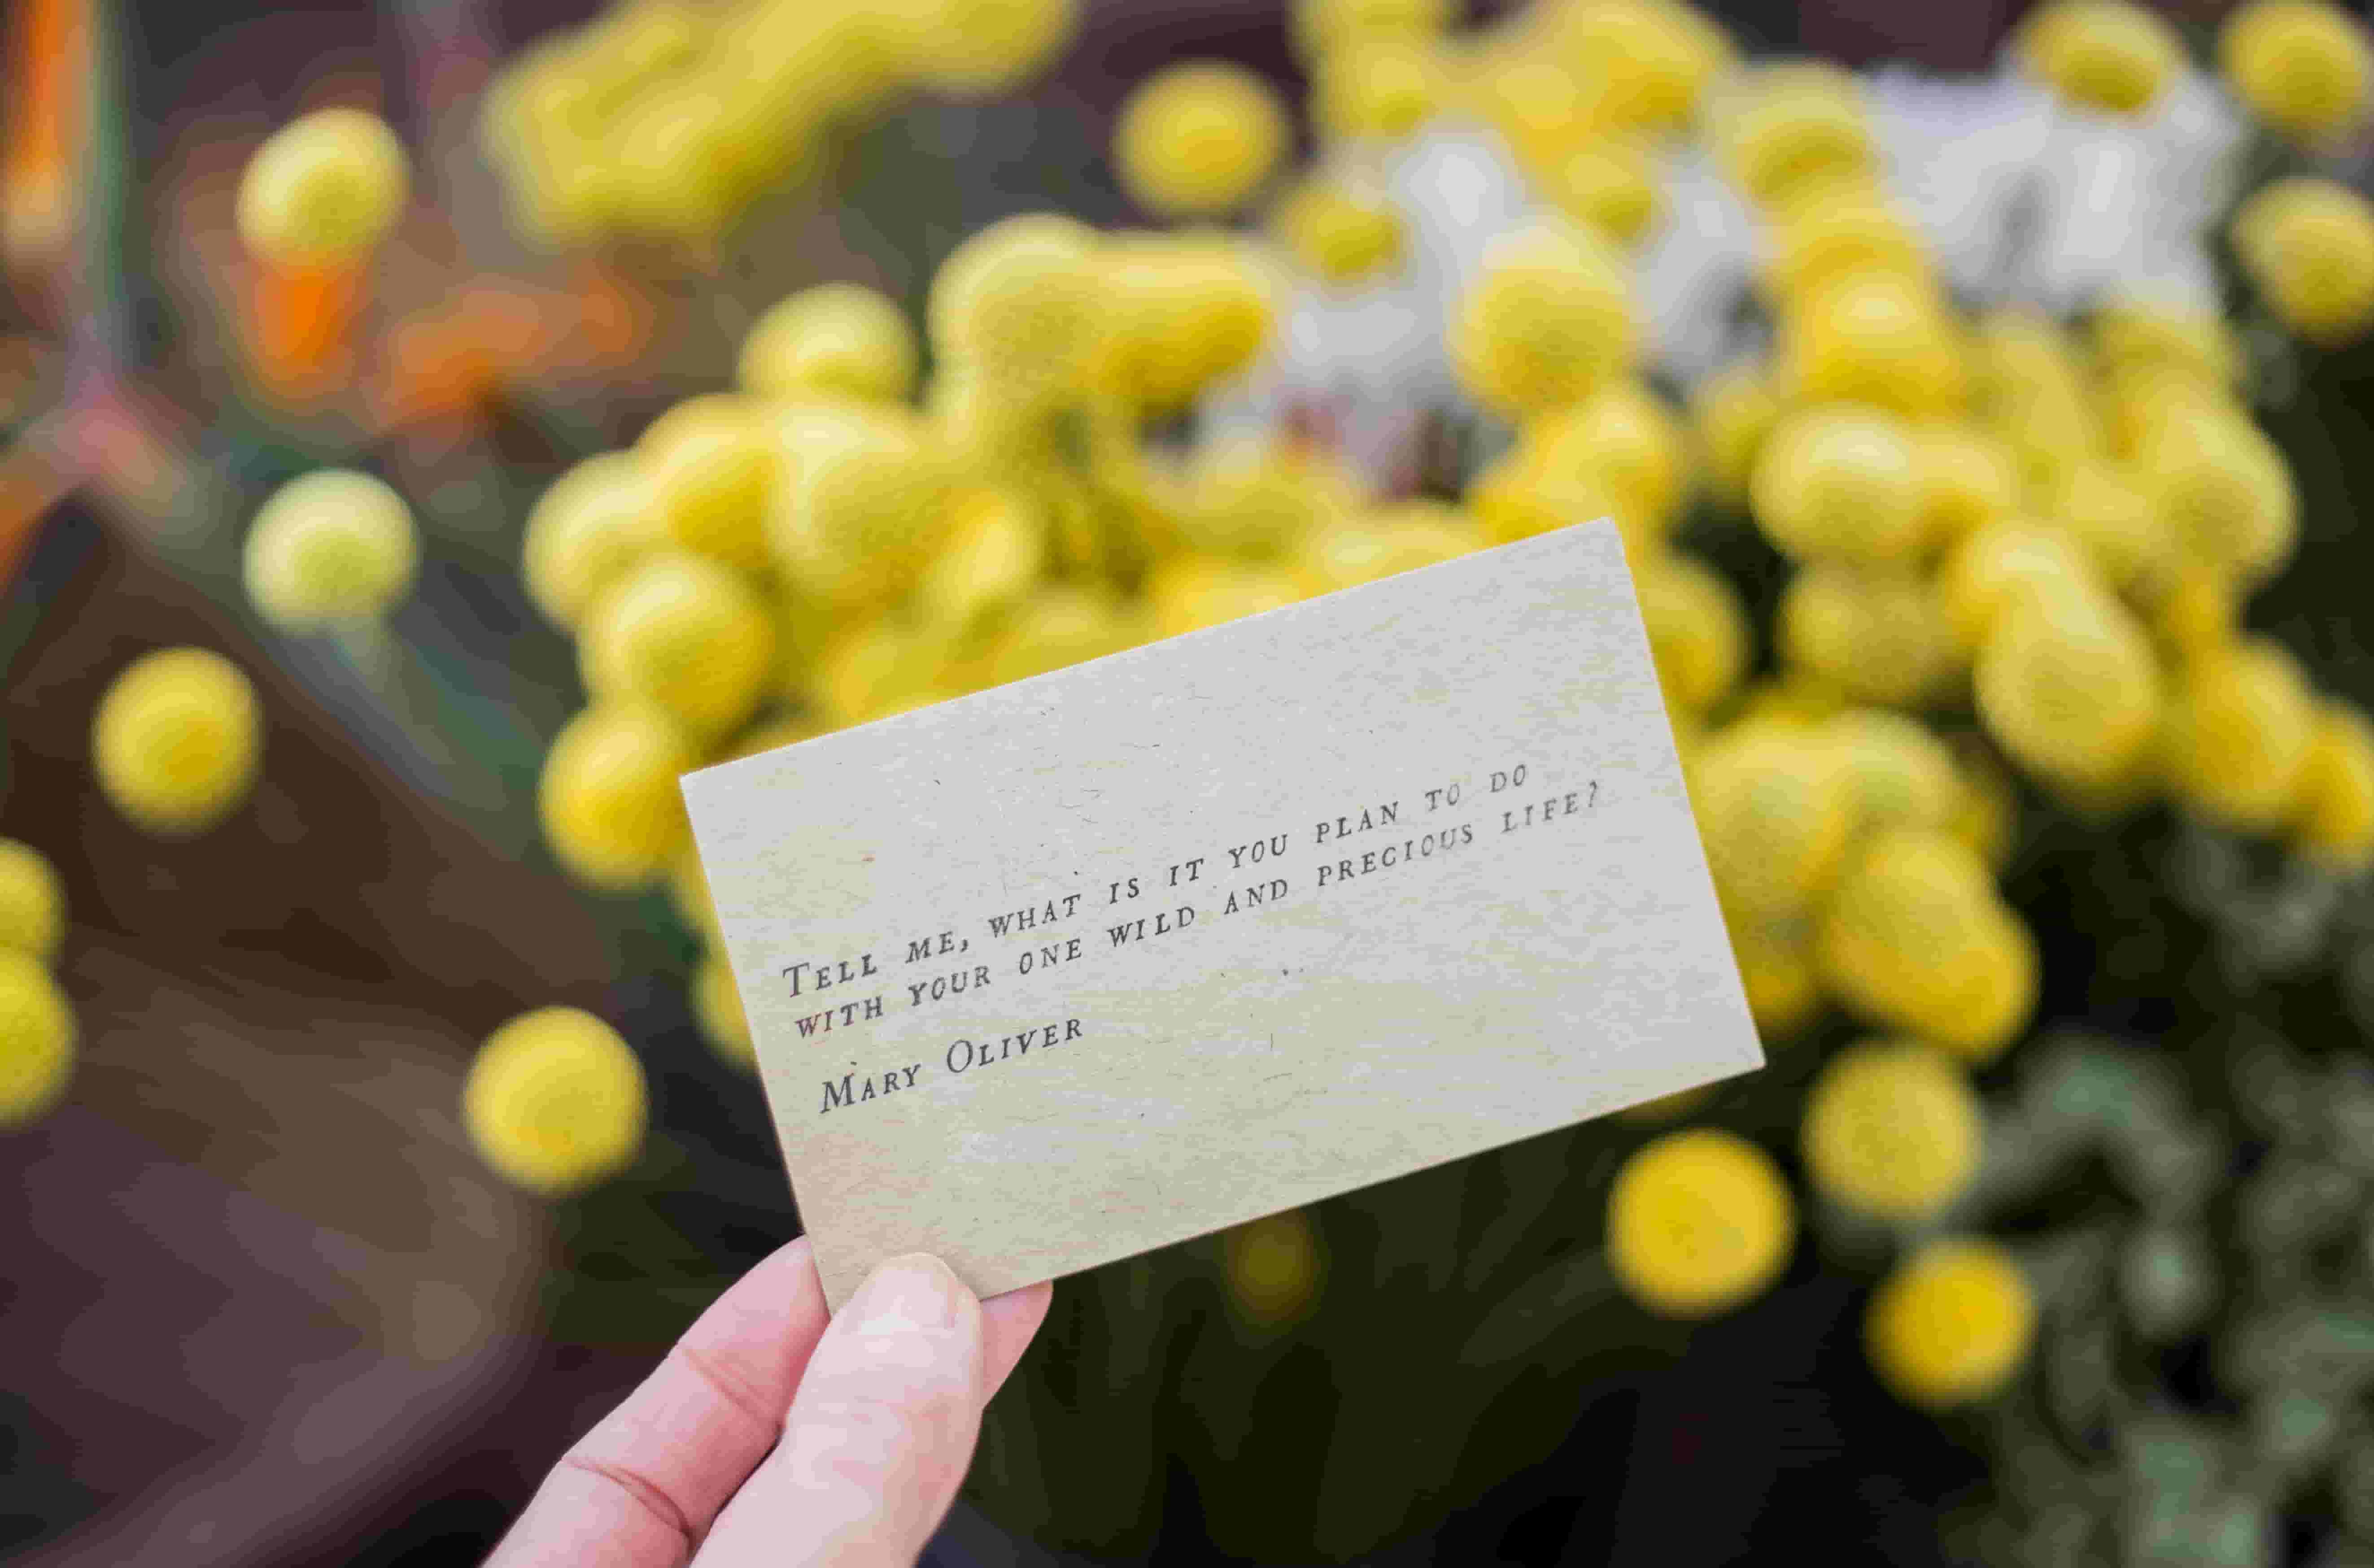 Close-up of an affirmation card, with the words: “Tell me, what is it you plan to do with your one wild and precious life?” by Mary Oliver